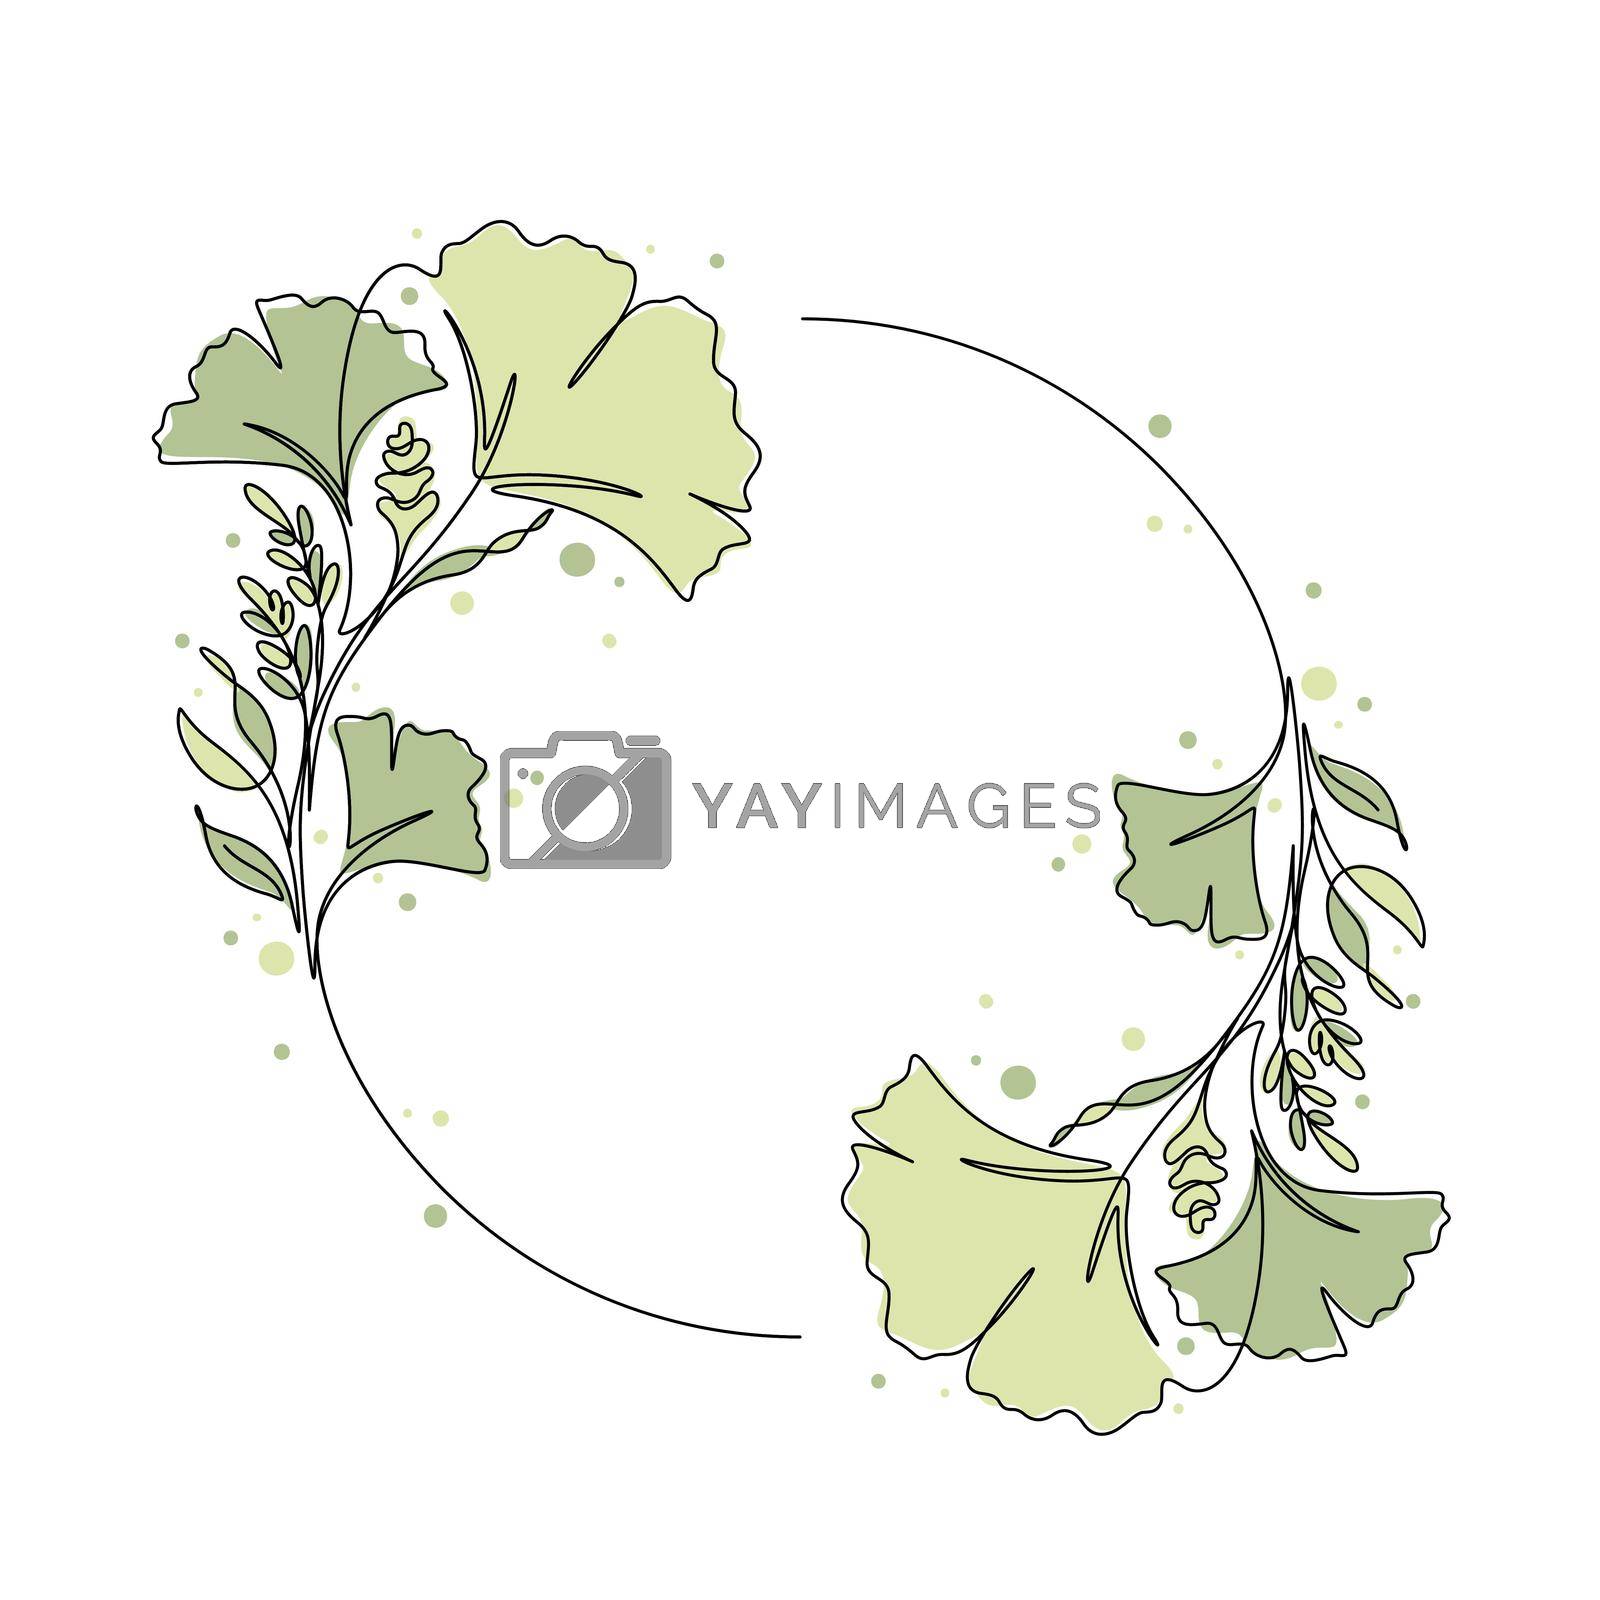 Royalty free image of ginkgo tree and leaf circle floral ornament vector illustration by dhtgip